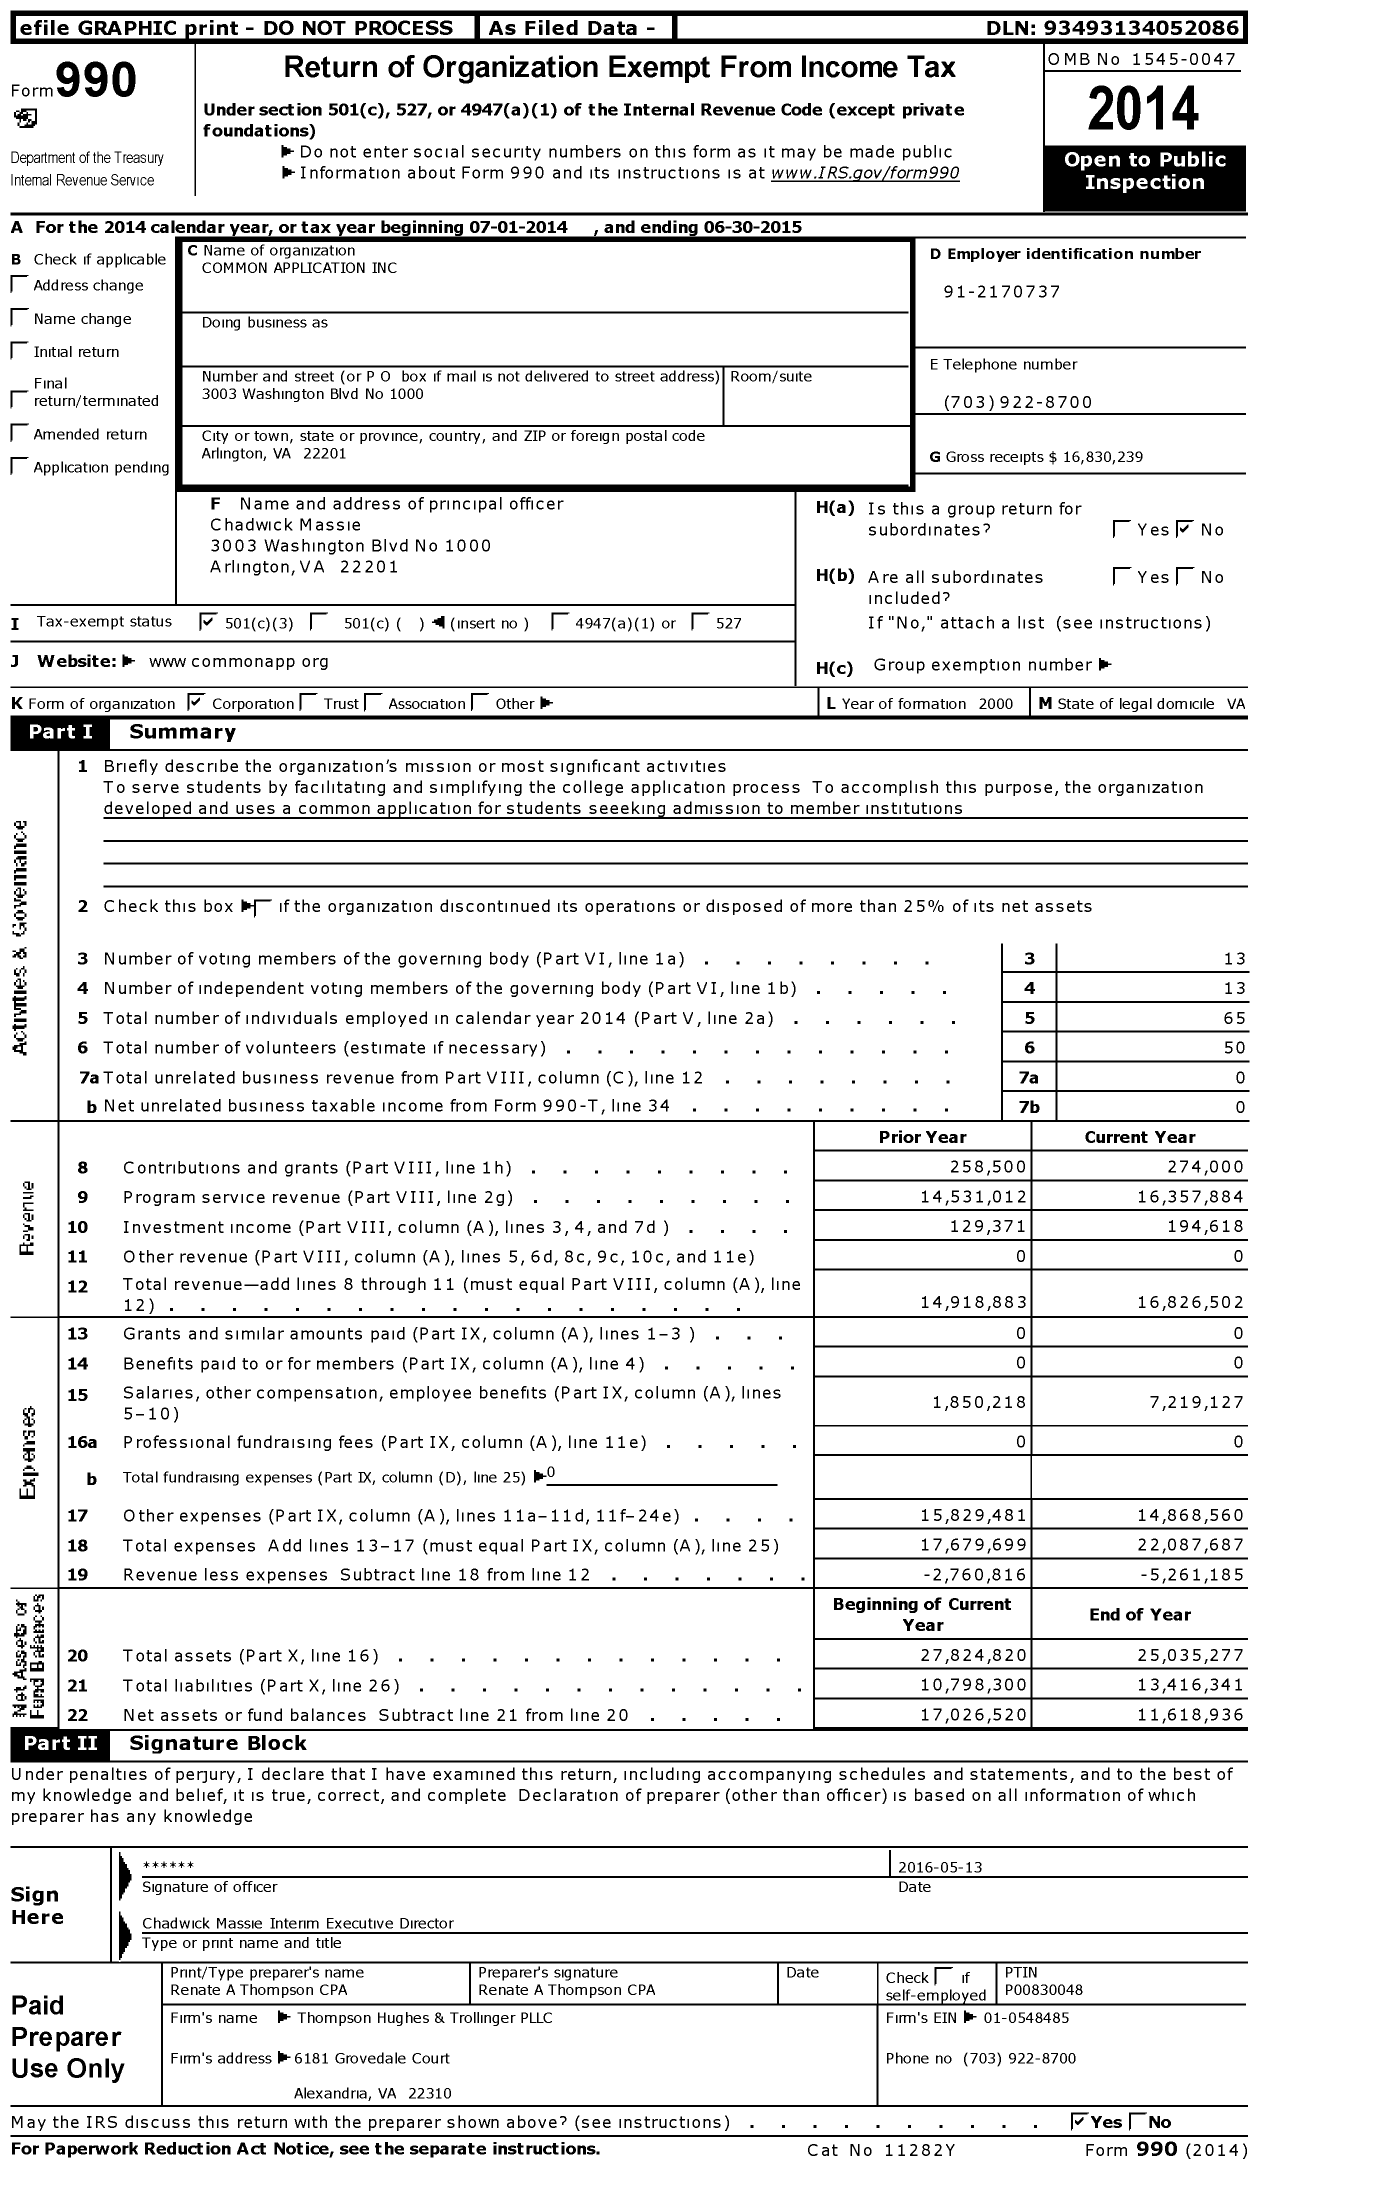 Image of first page of 2014 Form 990 for The Common Application